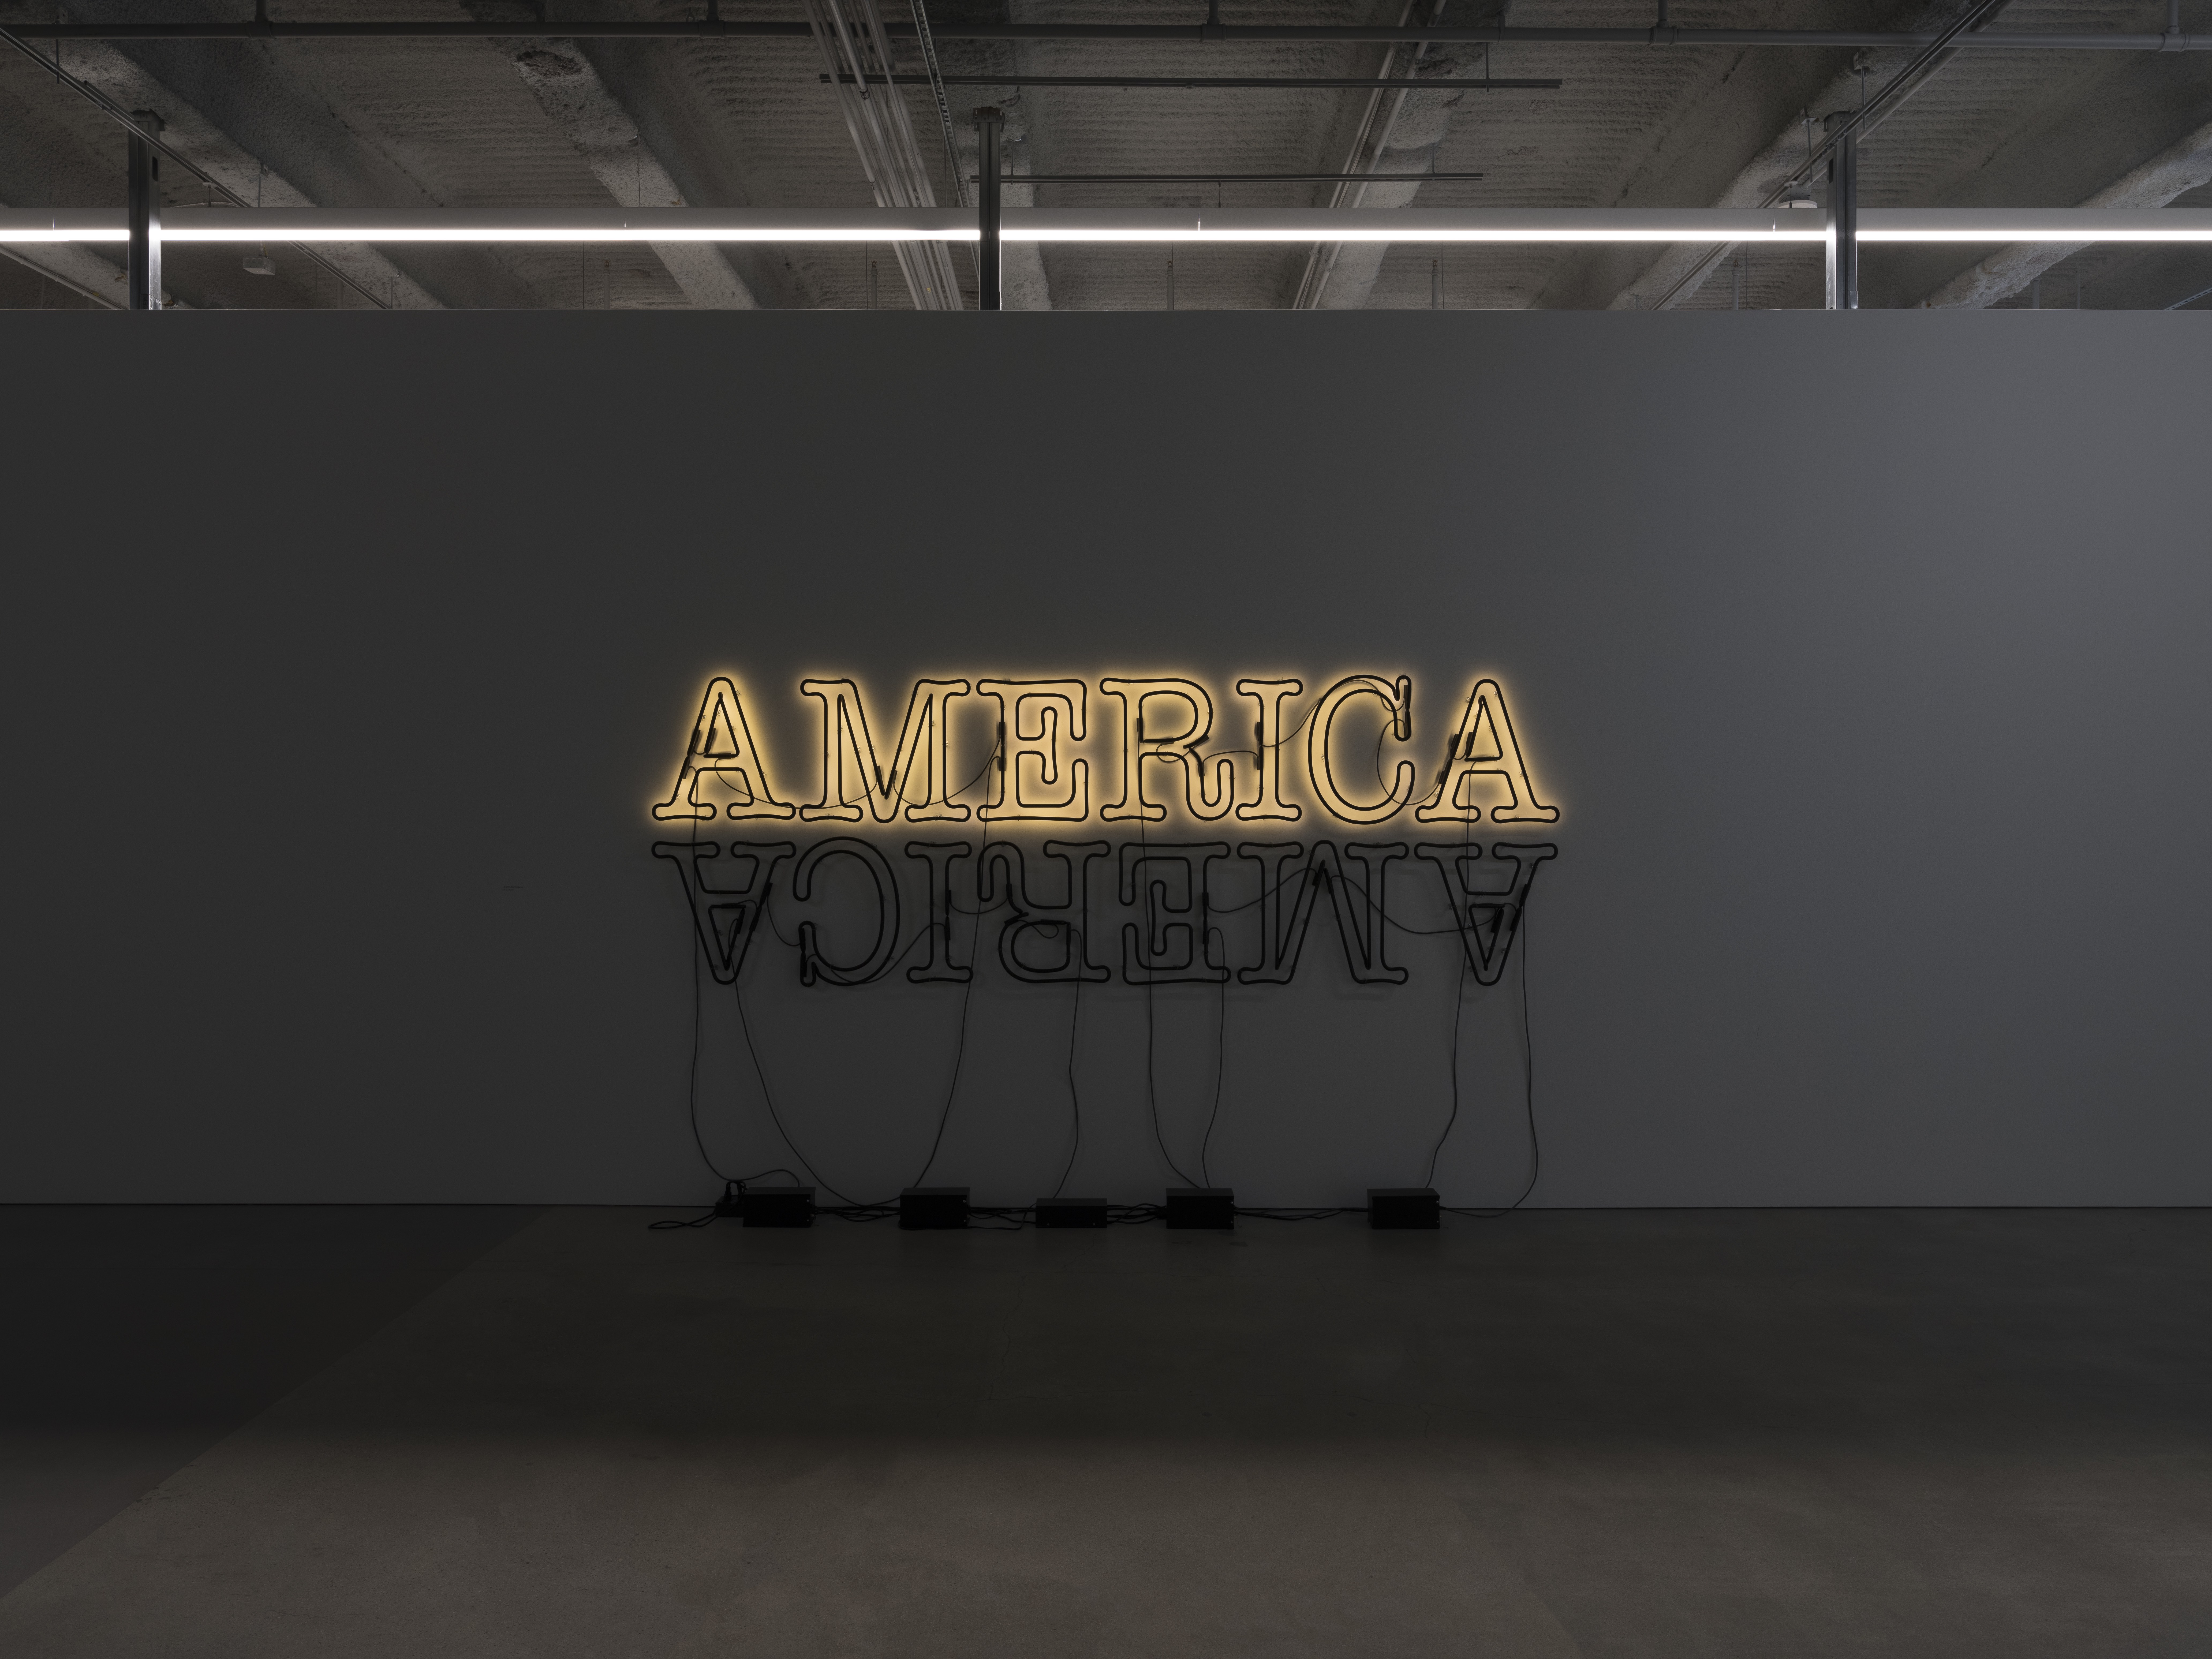 Glenn Ligon: Selections from the Marciano Collection